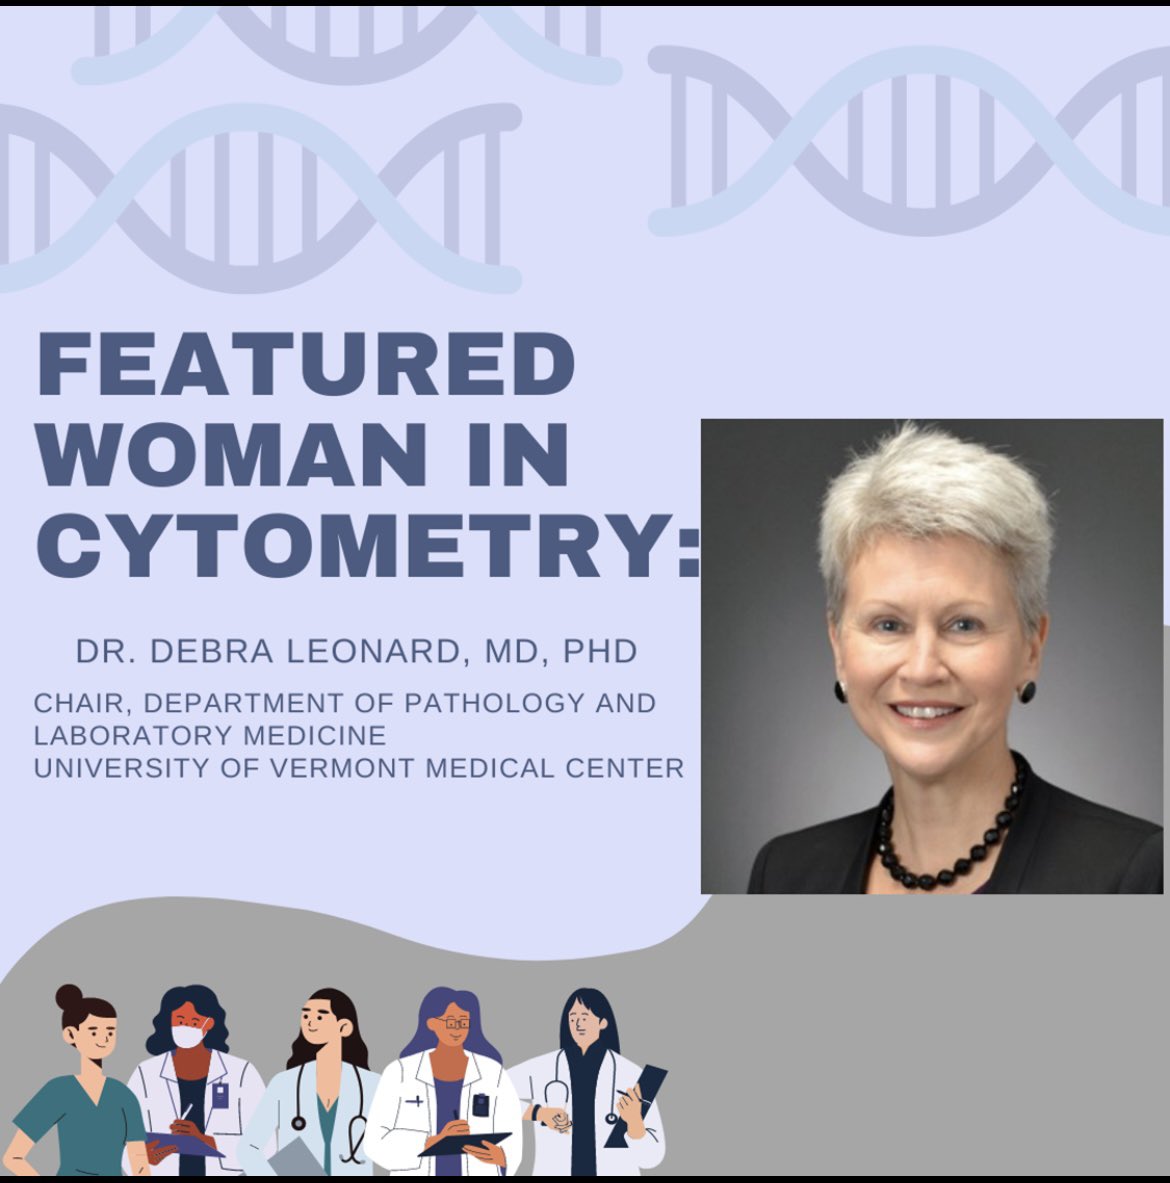 Dr. Debra Leonard, MD, PhD was ICCS WIC’s keynote speaker for the 2022 Meeting! She led a powerful discussion titled “Leading from Within”, inspiring many young women in Cytometry. Do you have any mentors or leaders that have helped you during your career? #LabWeek2023